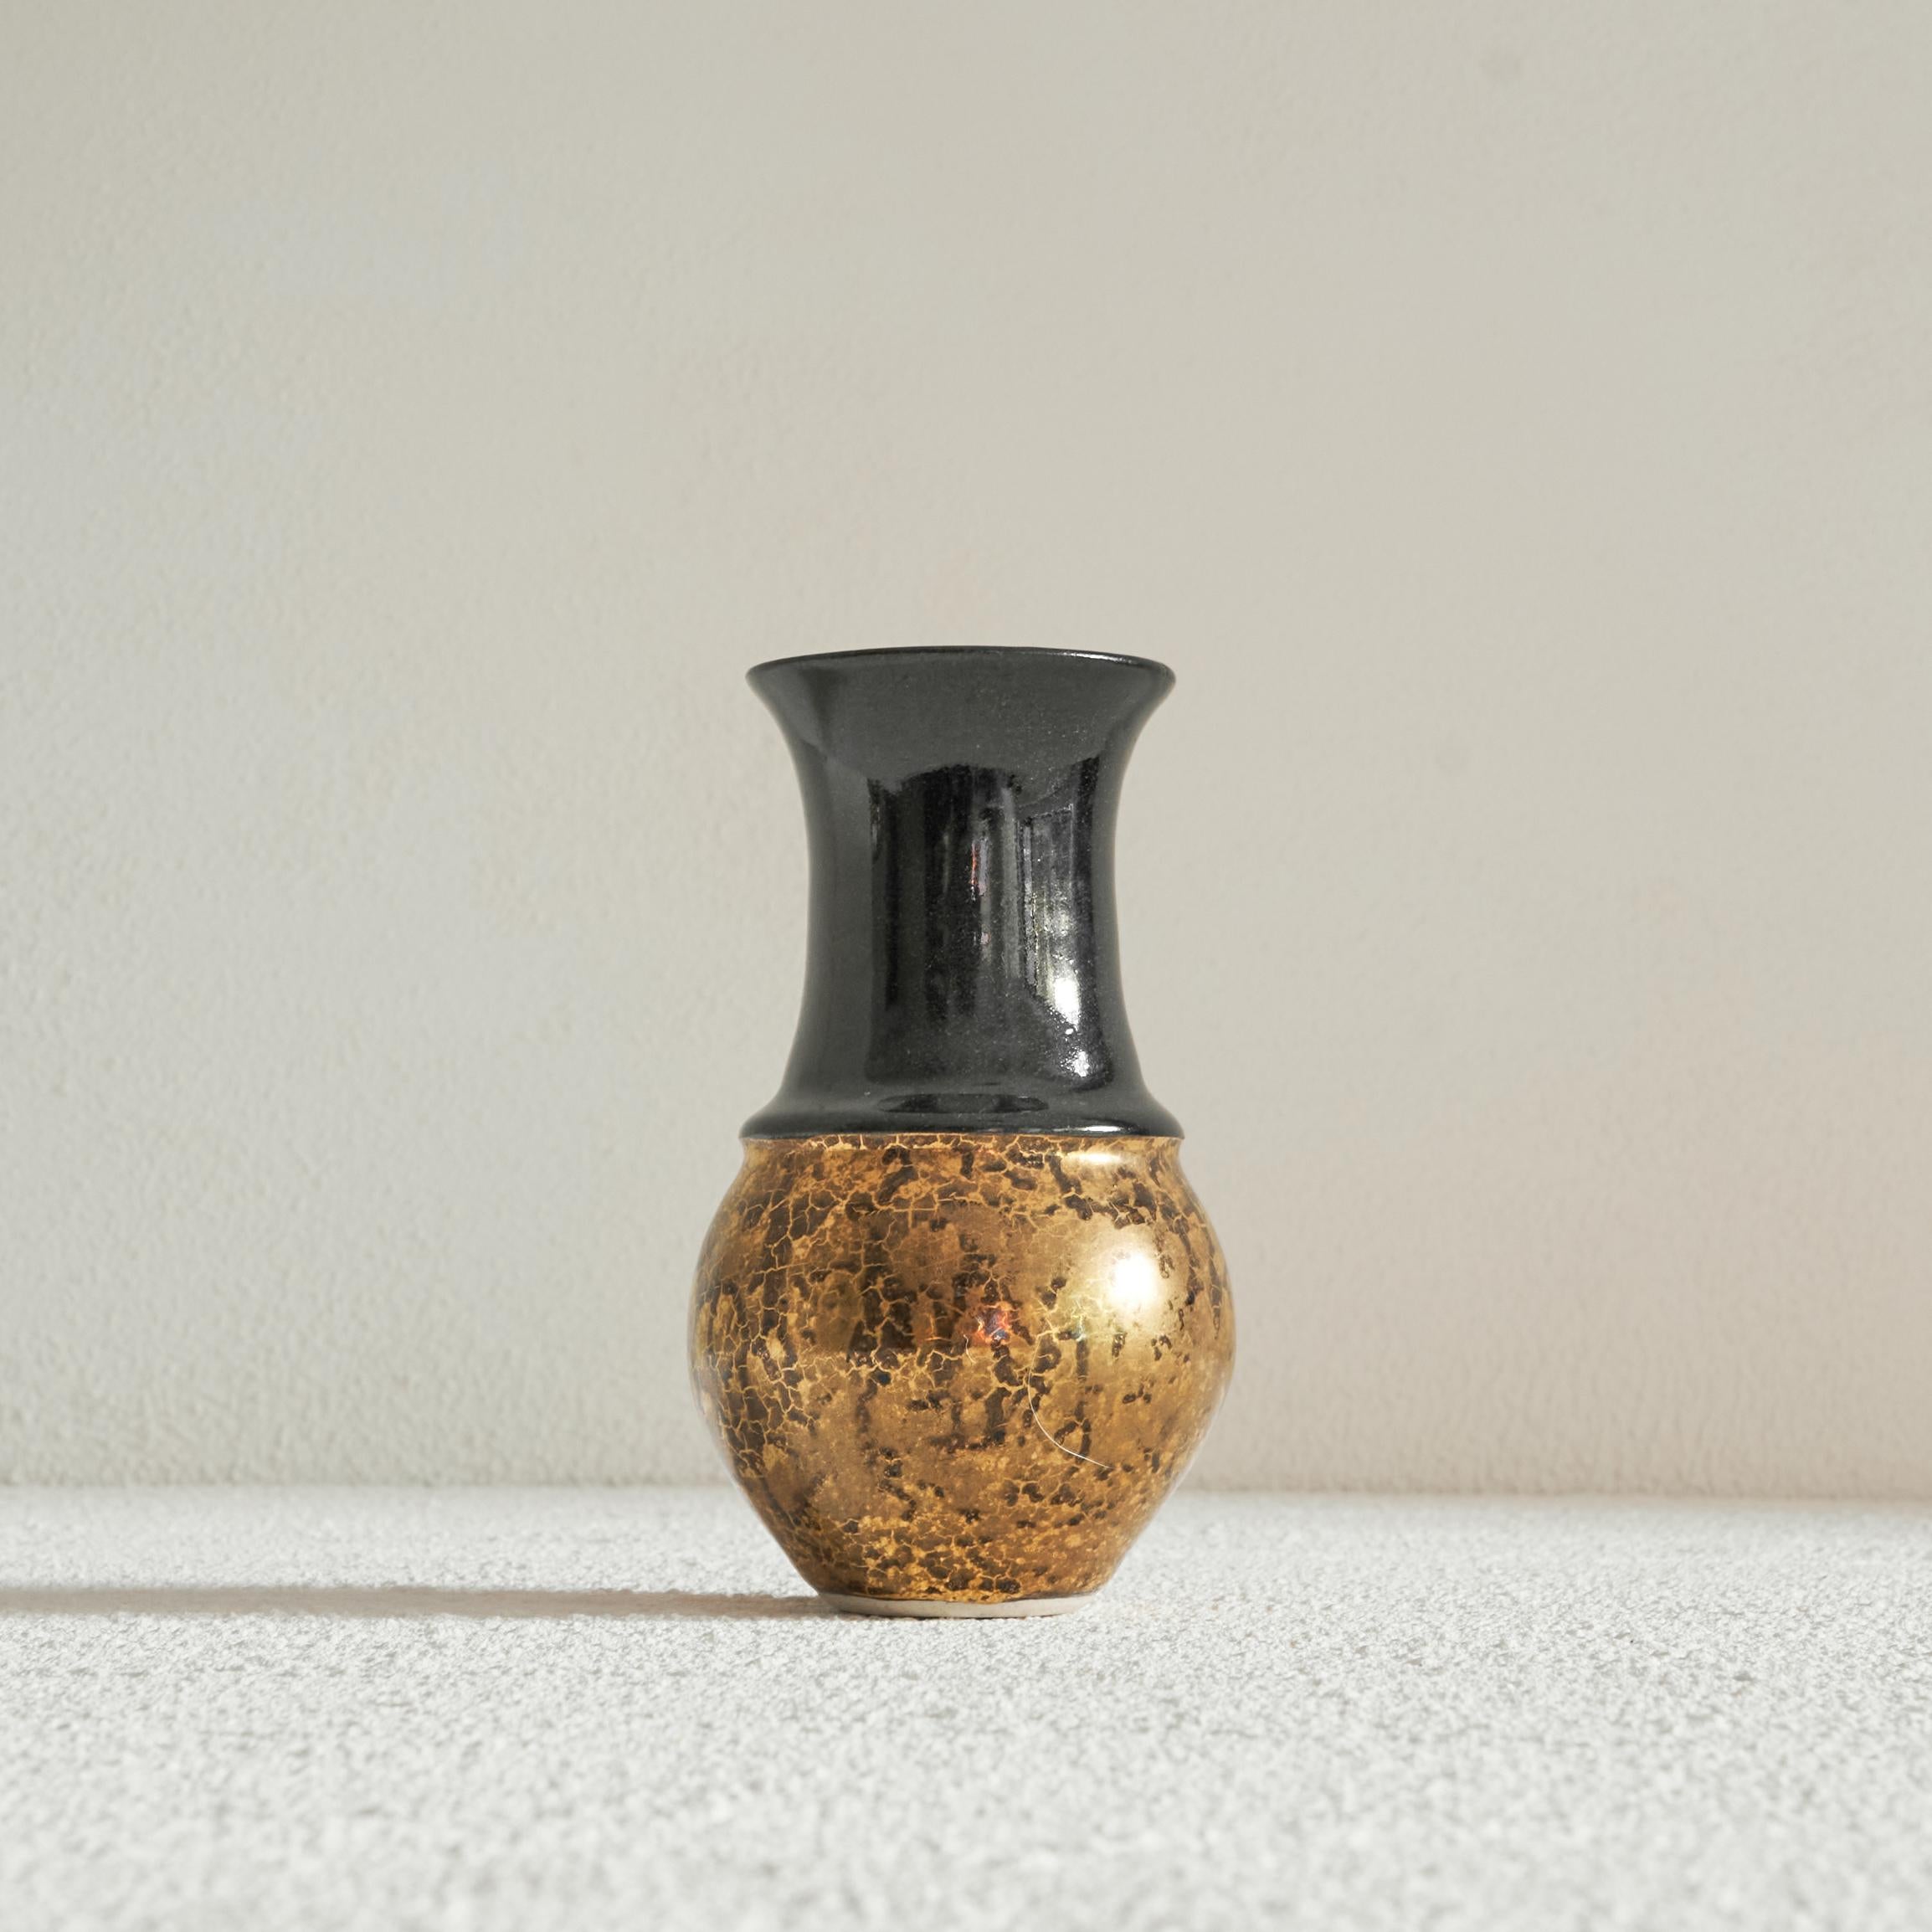 Art Deco vase in Black and Gold Craquelé, early 20th century.

Stylish and distinct art deco vase in gold craquelé and black. Elegant shape, with a nice contrast between the gold and the black. 

Signed FvH, probably stands for the name of the